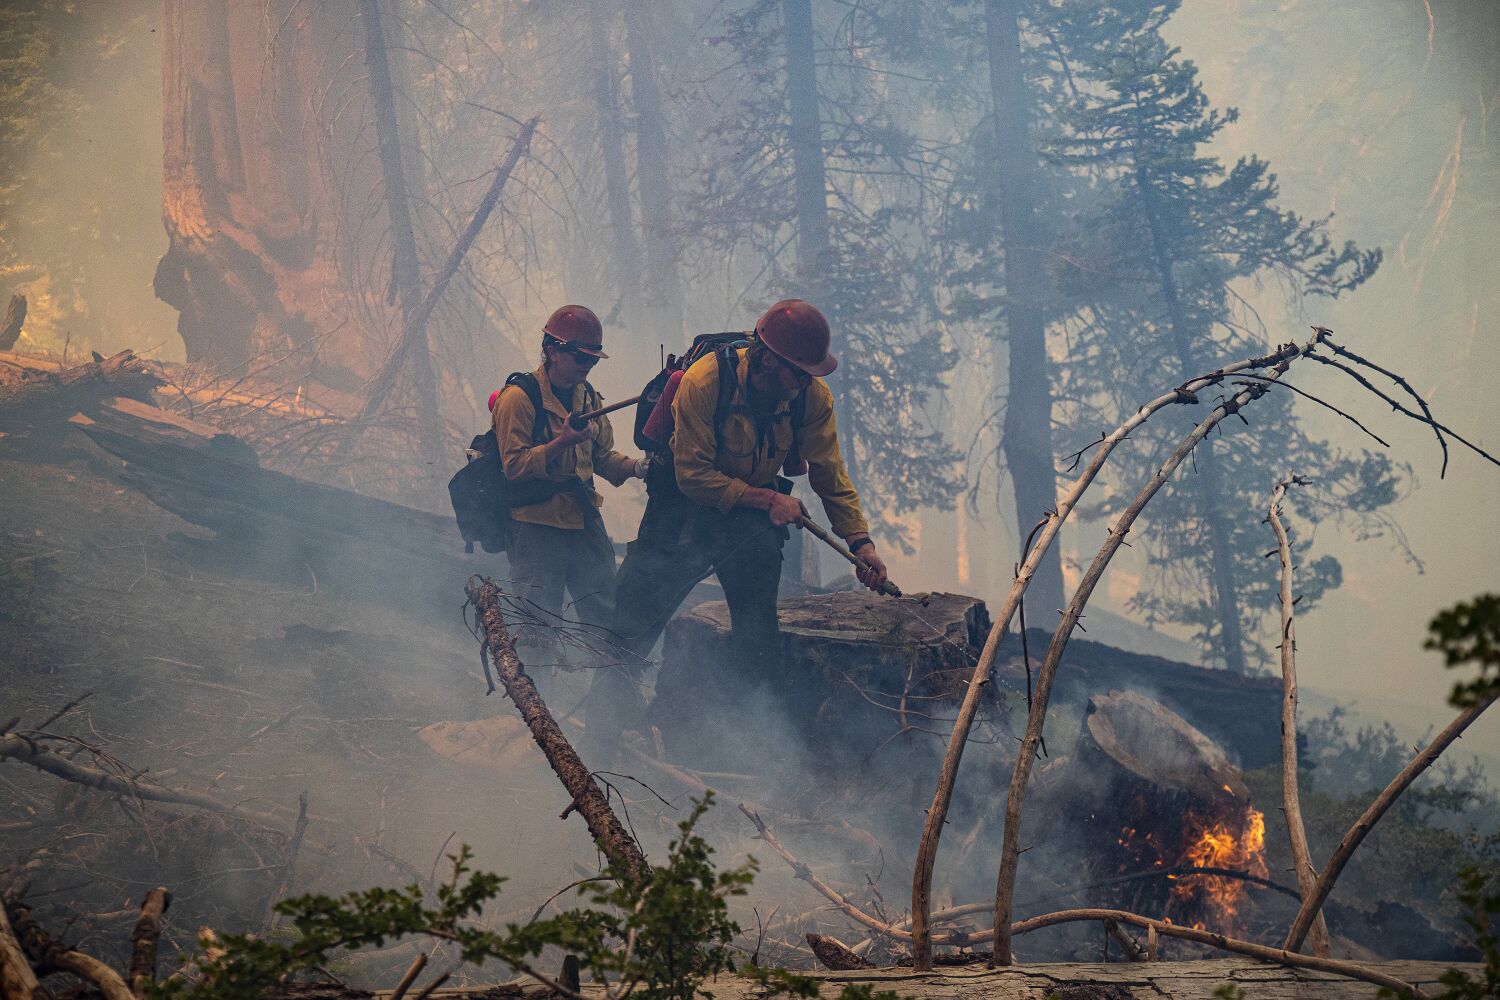 Can a $20-million liability fund encourage more 'good fire' in California? 